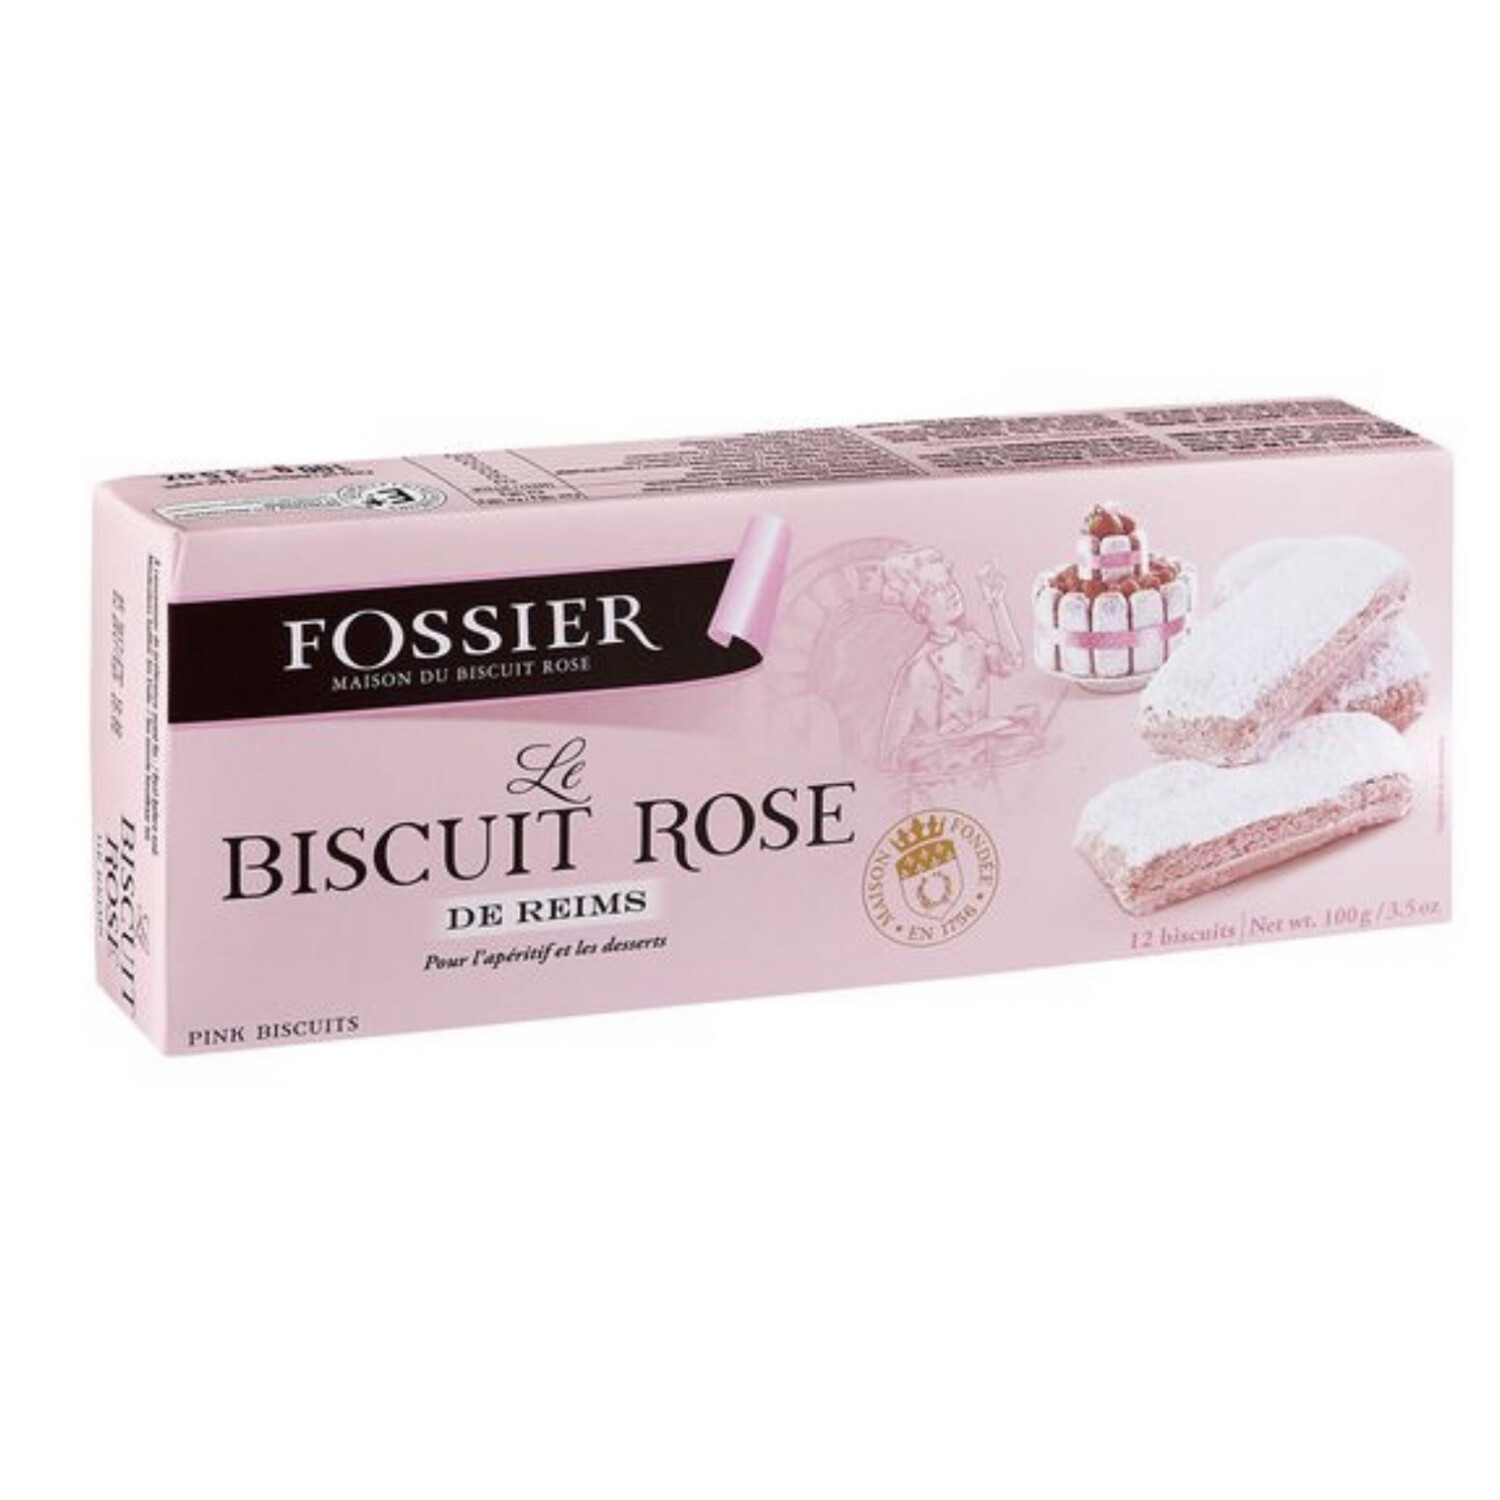 fossier pink champagne biscuits